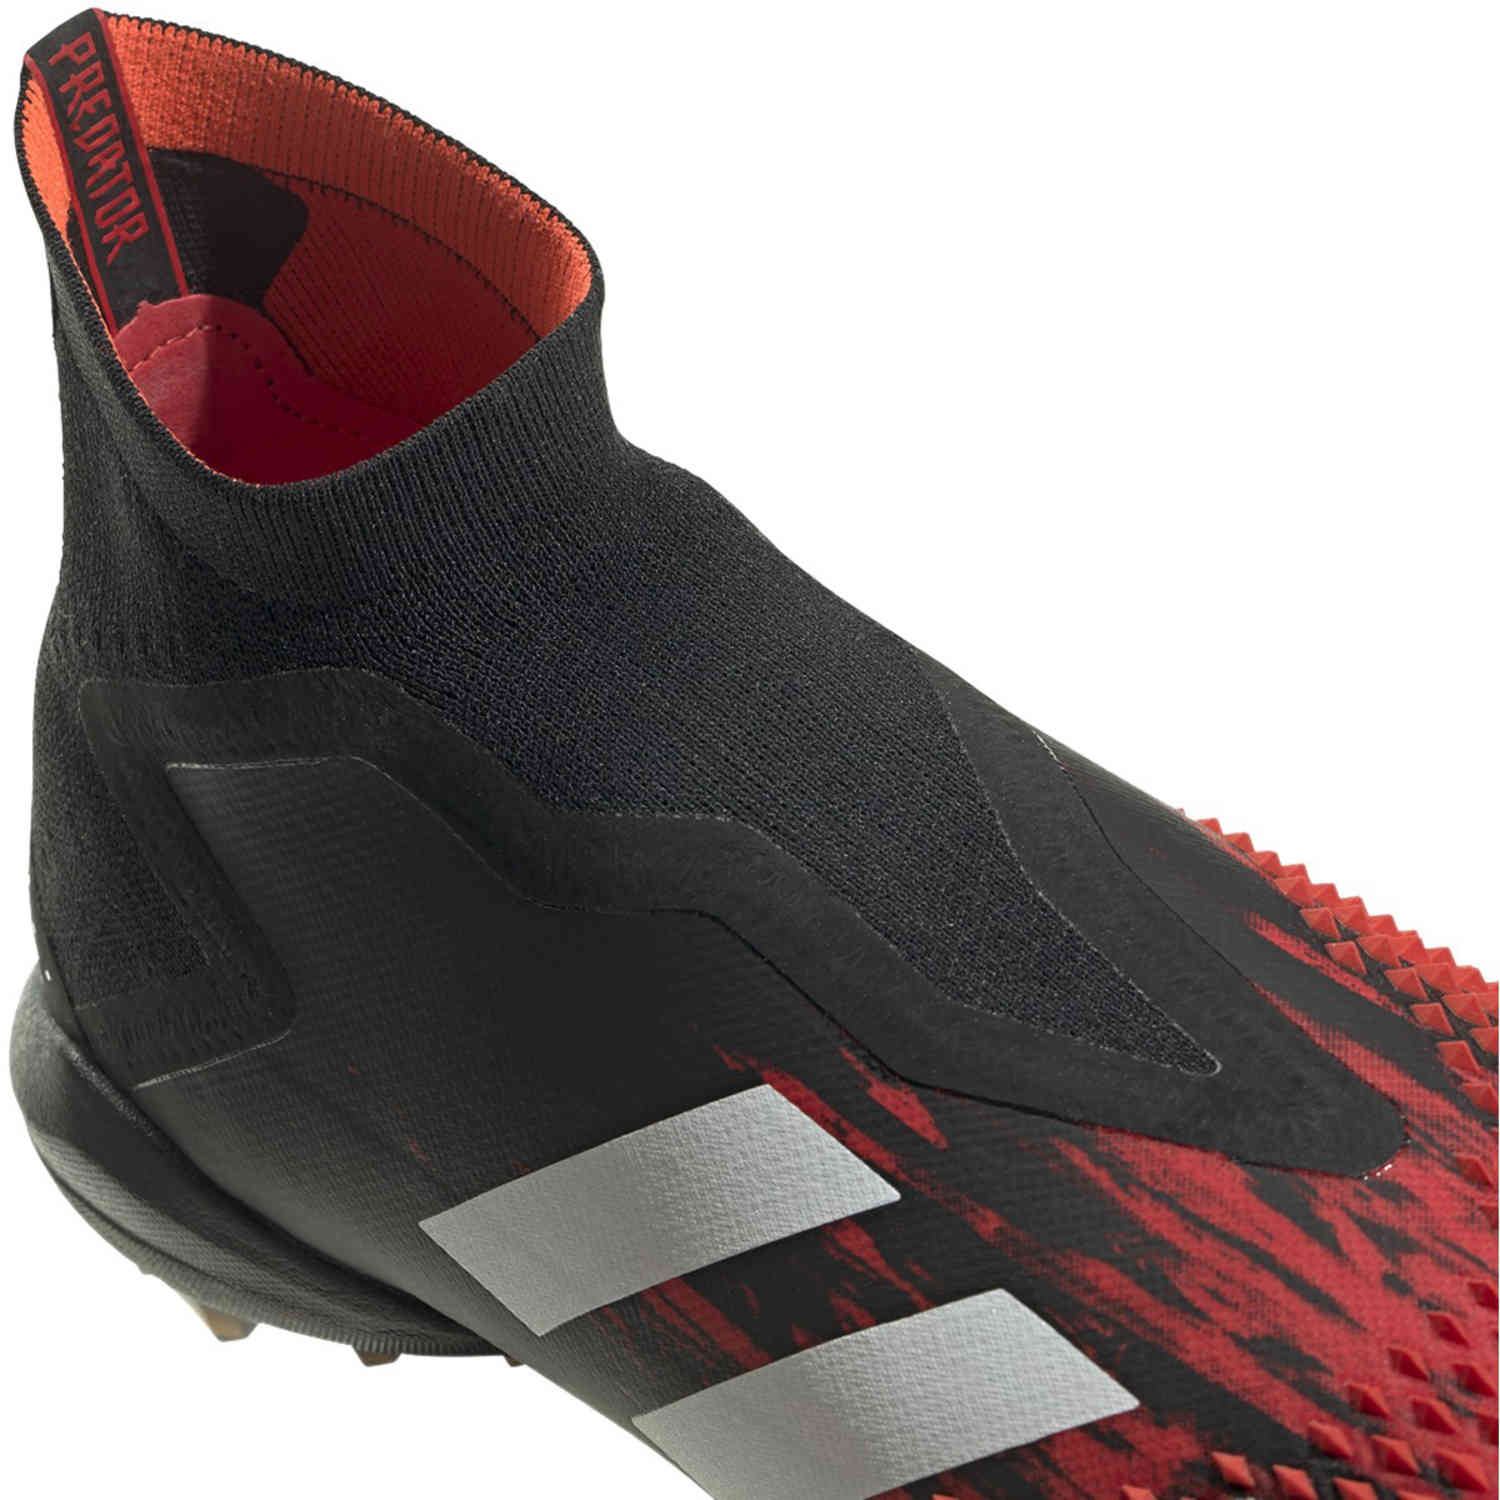 New 'Demonskin' Adidas Predator boots are available now.